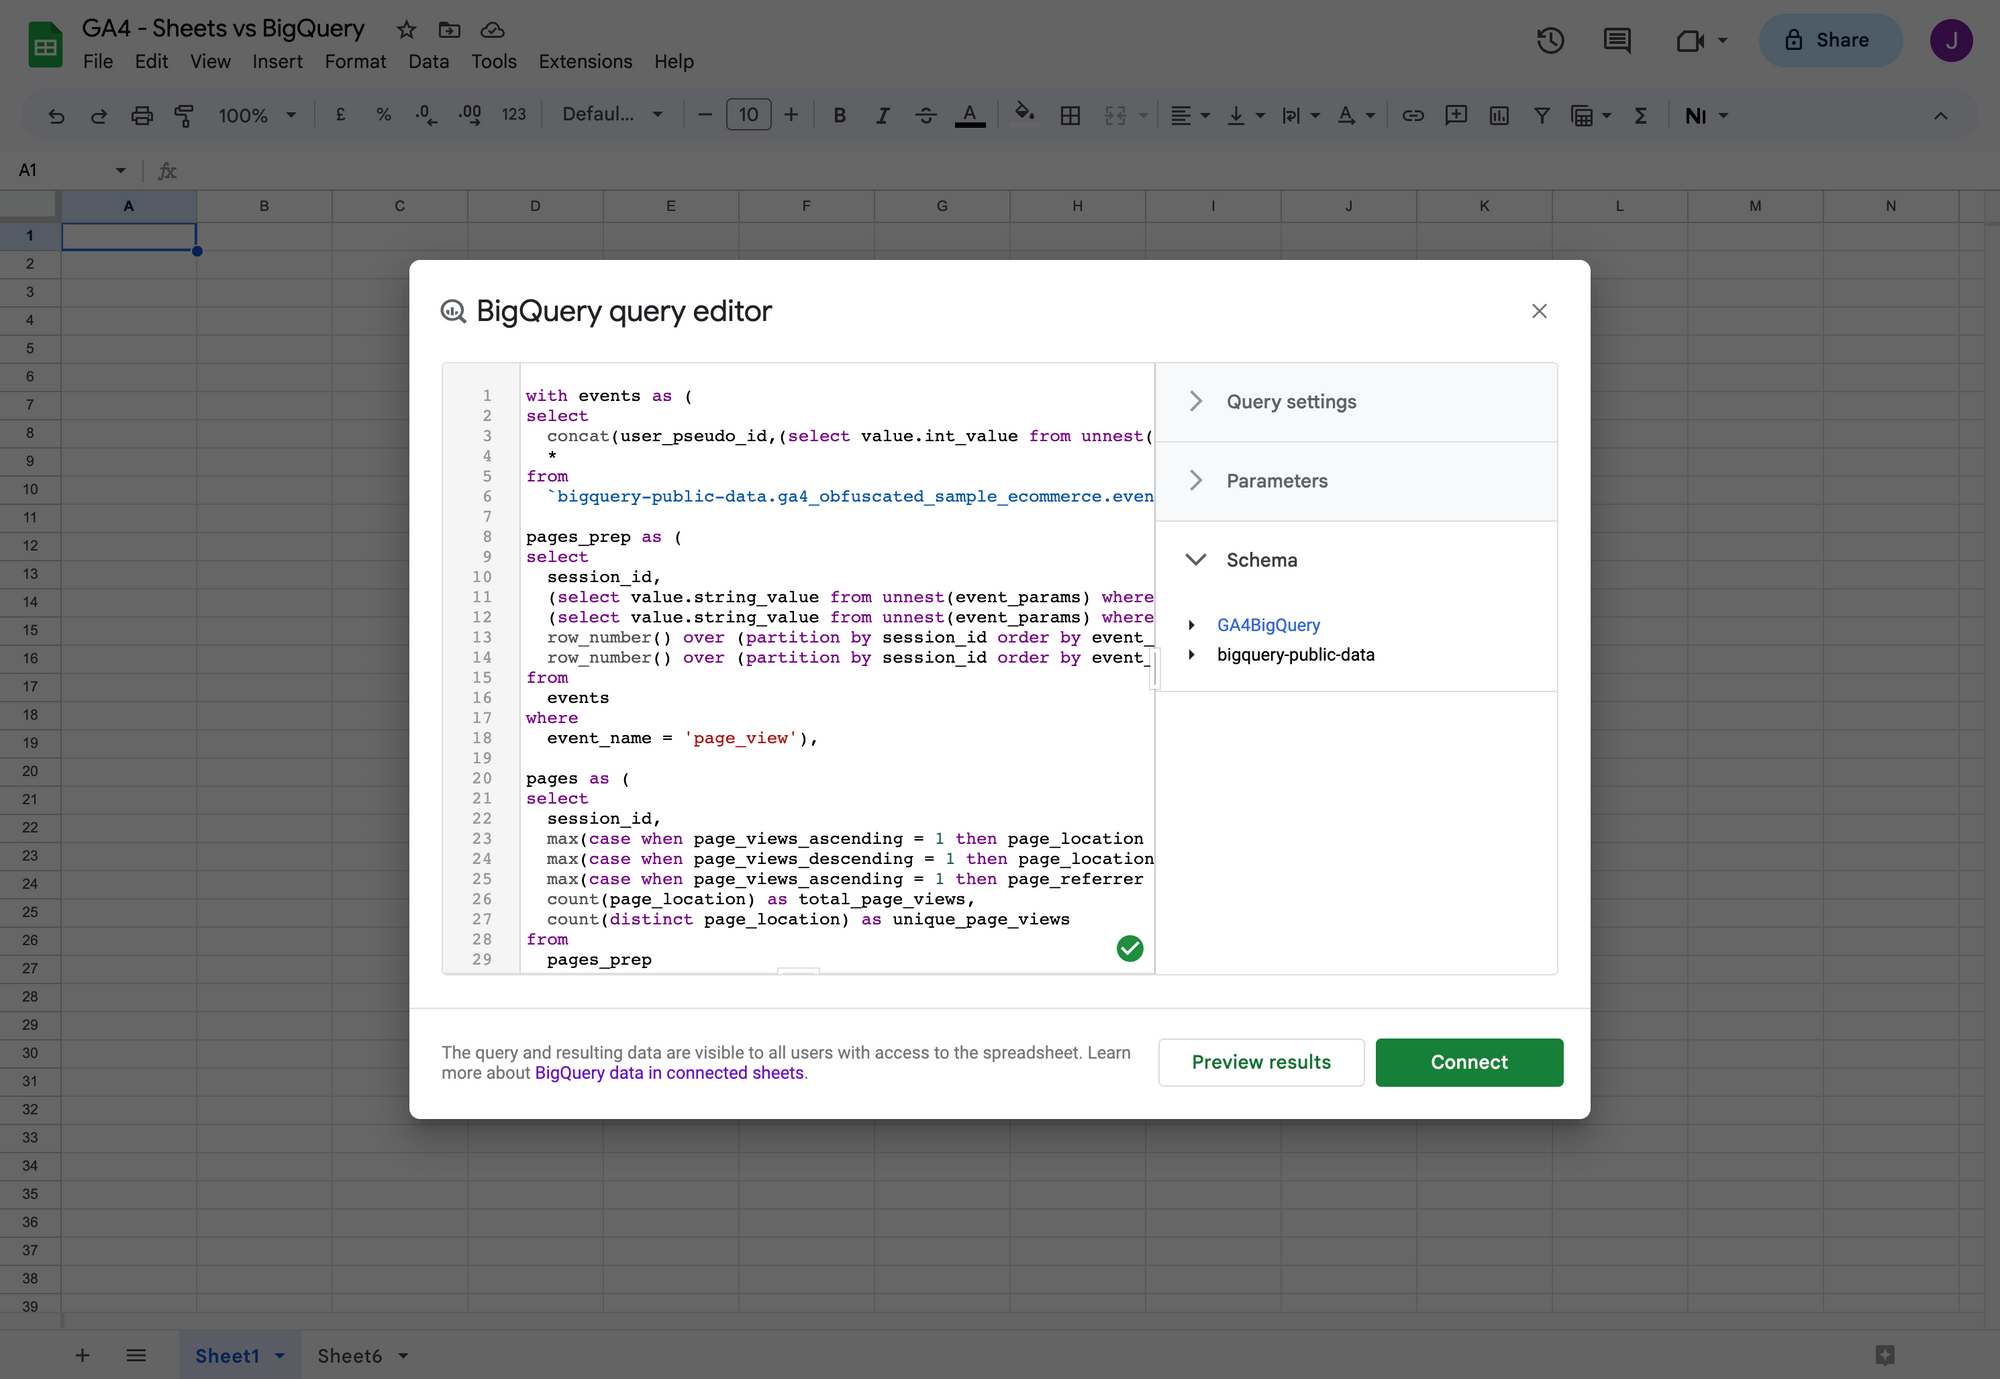 How to set up Google 'Connected' Sheets to access GA4 BigQuery export data without learning SQL